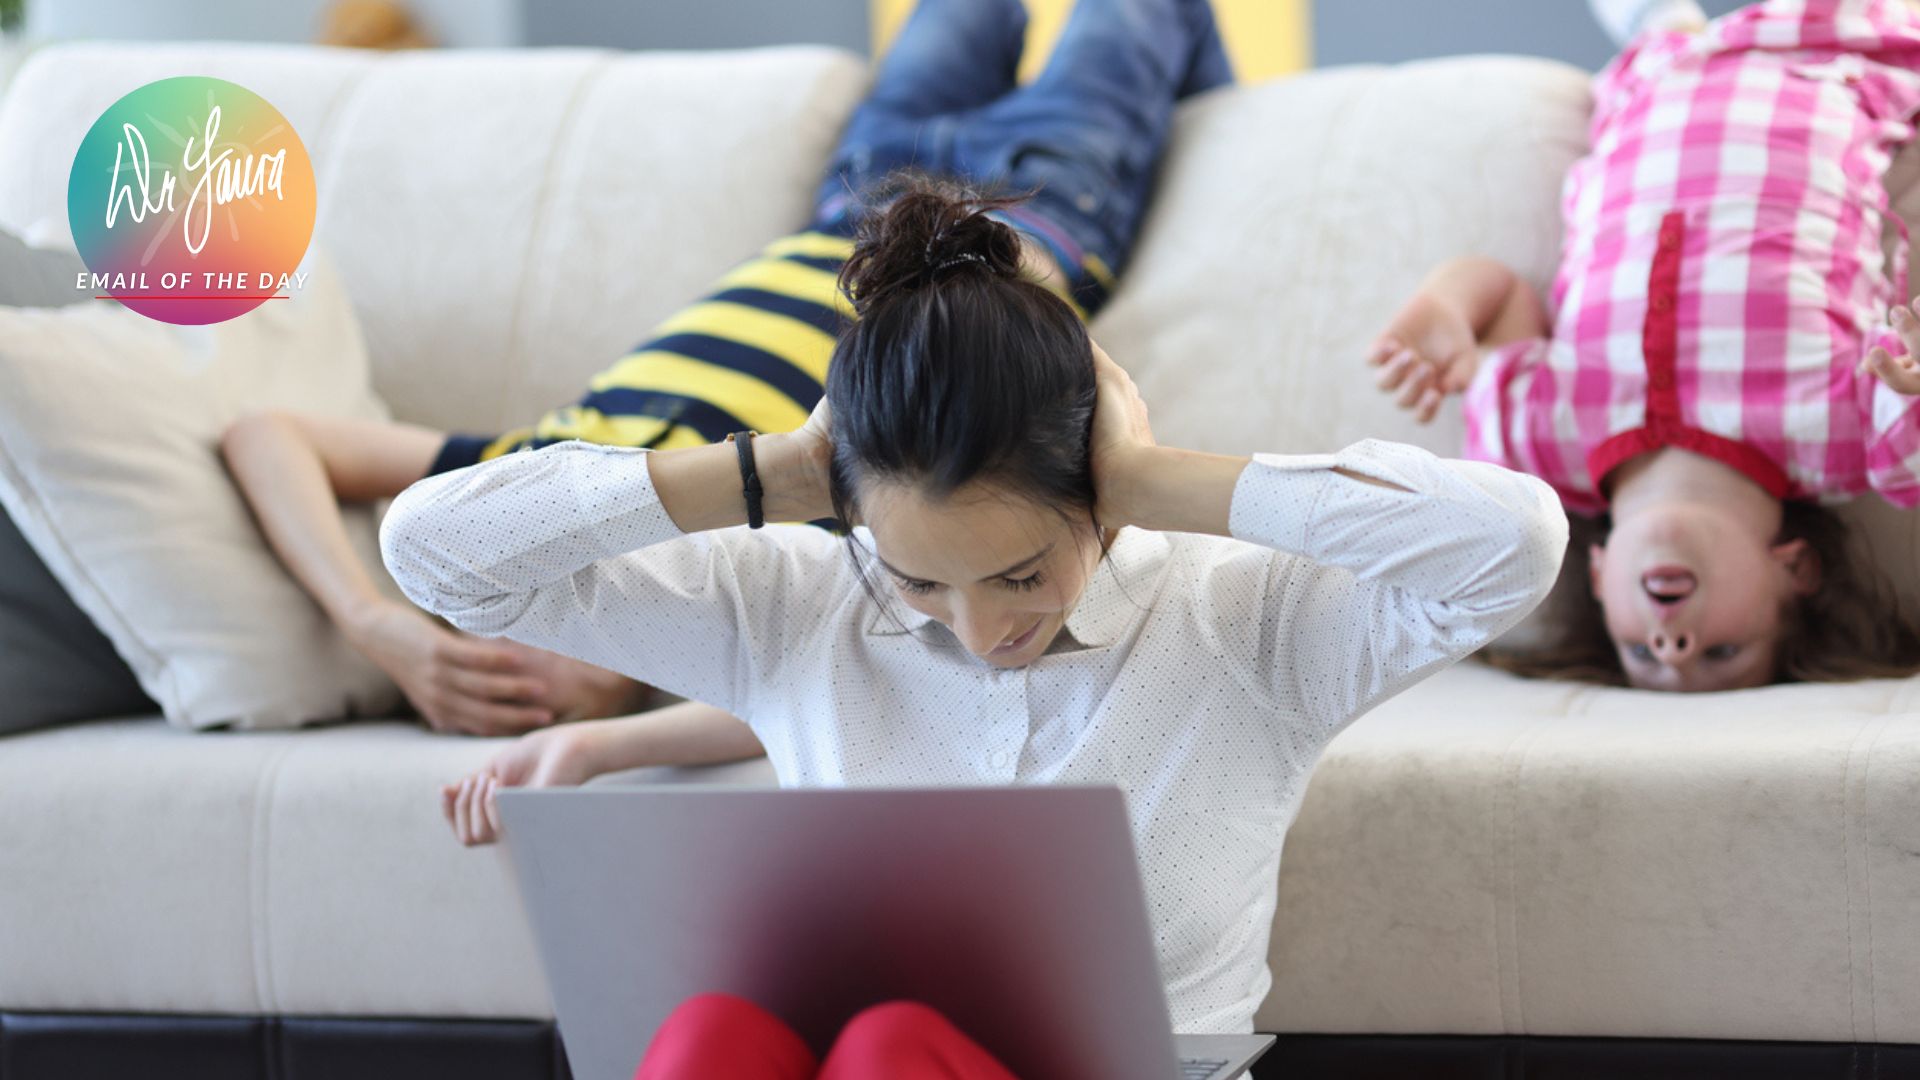 Woman covers her ears while sitting on the ground with a laptop on her lap, children sit on the couch behind her